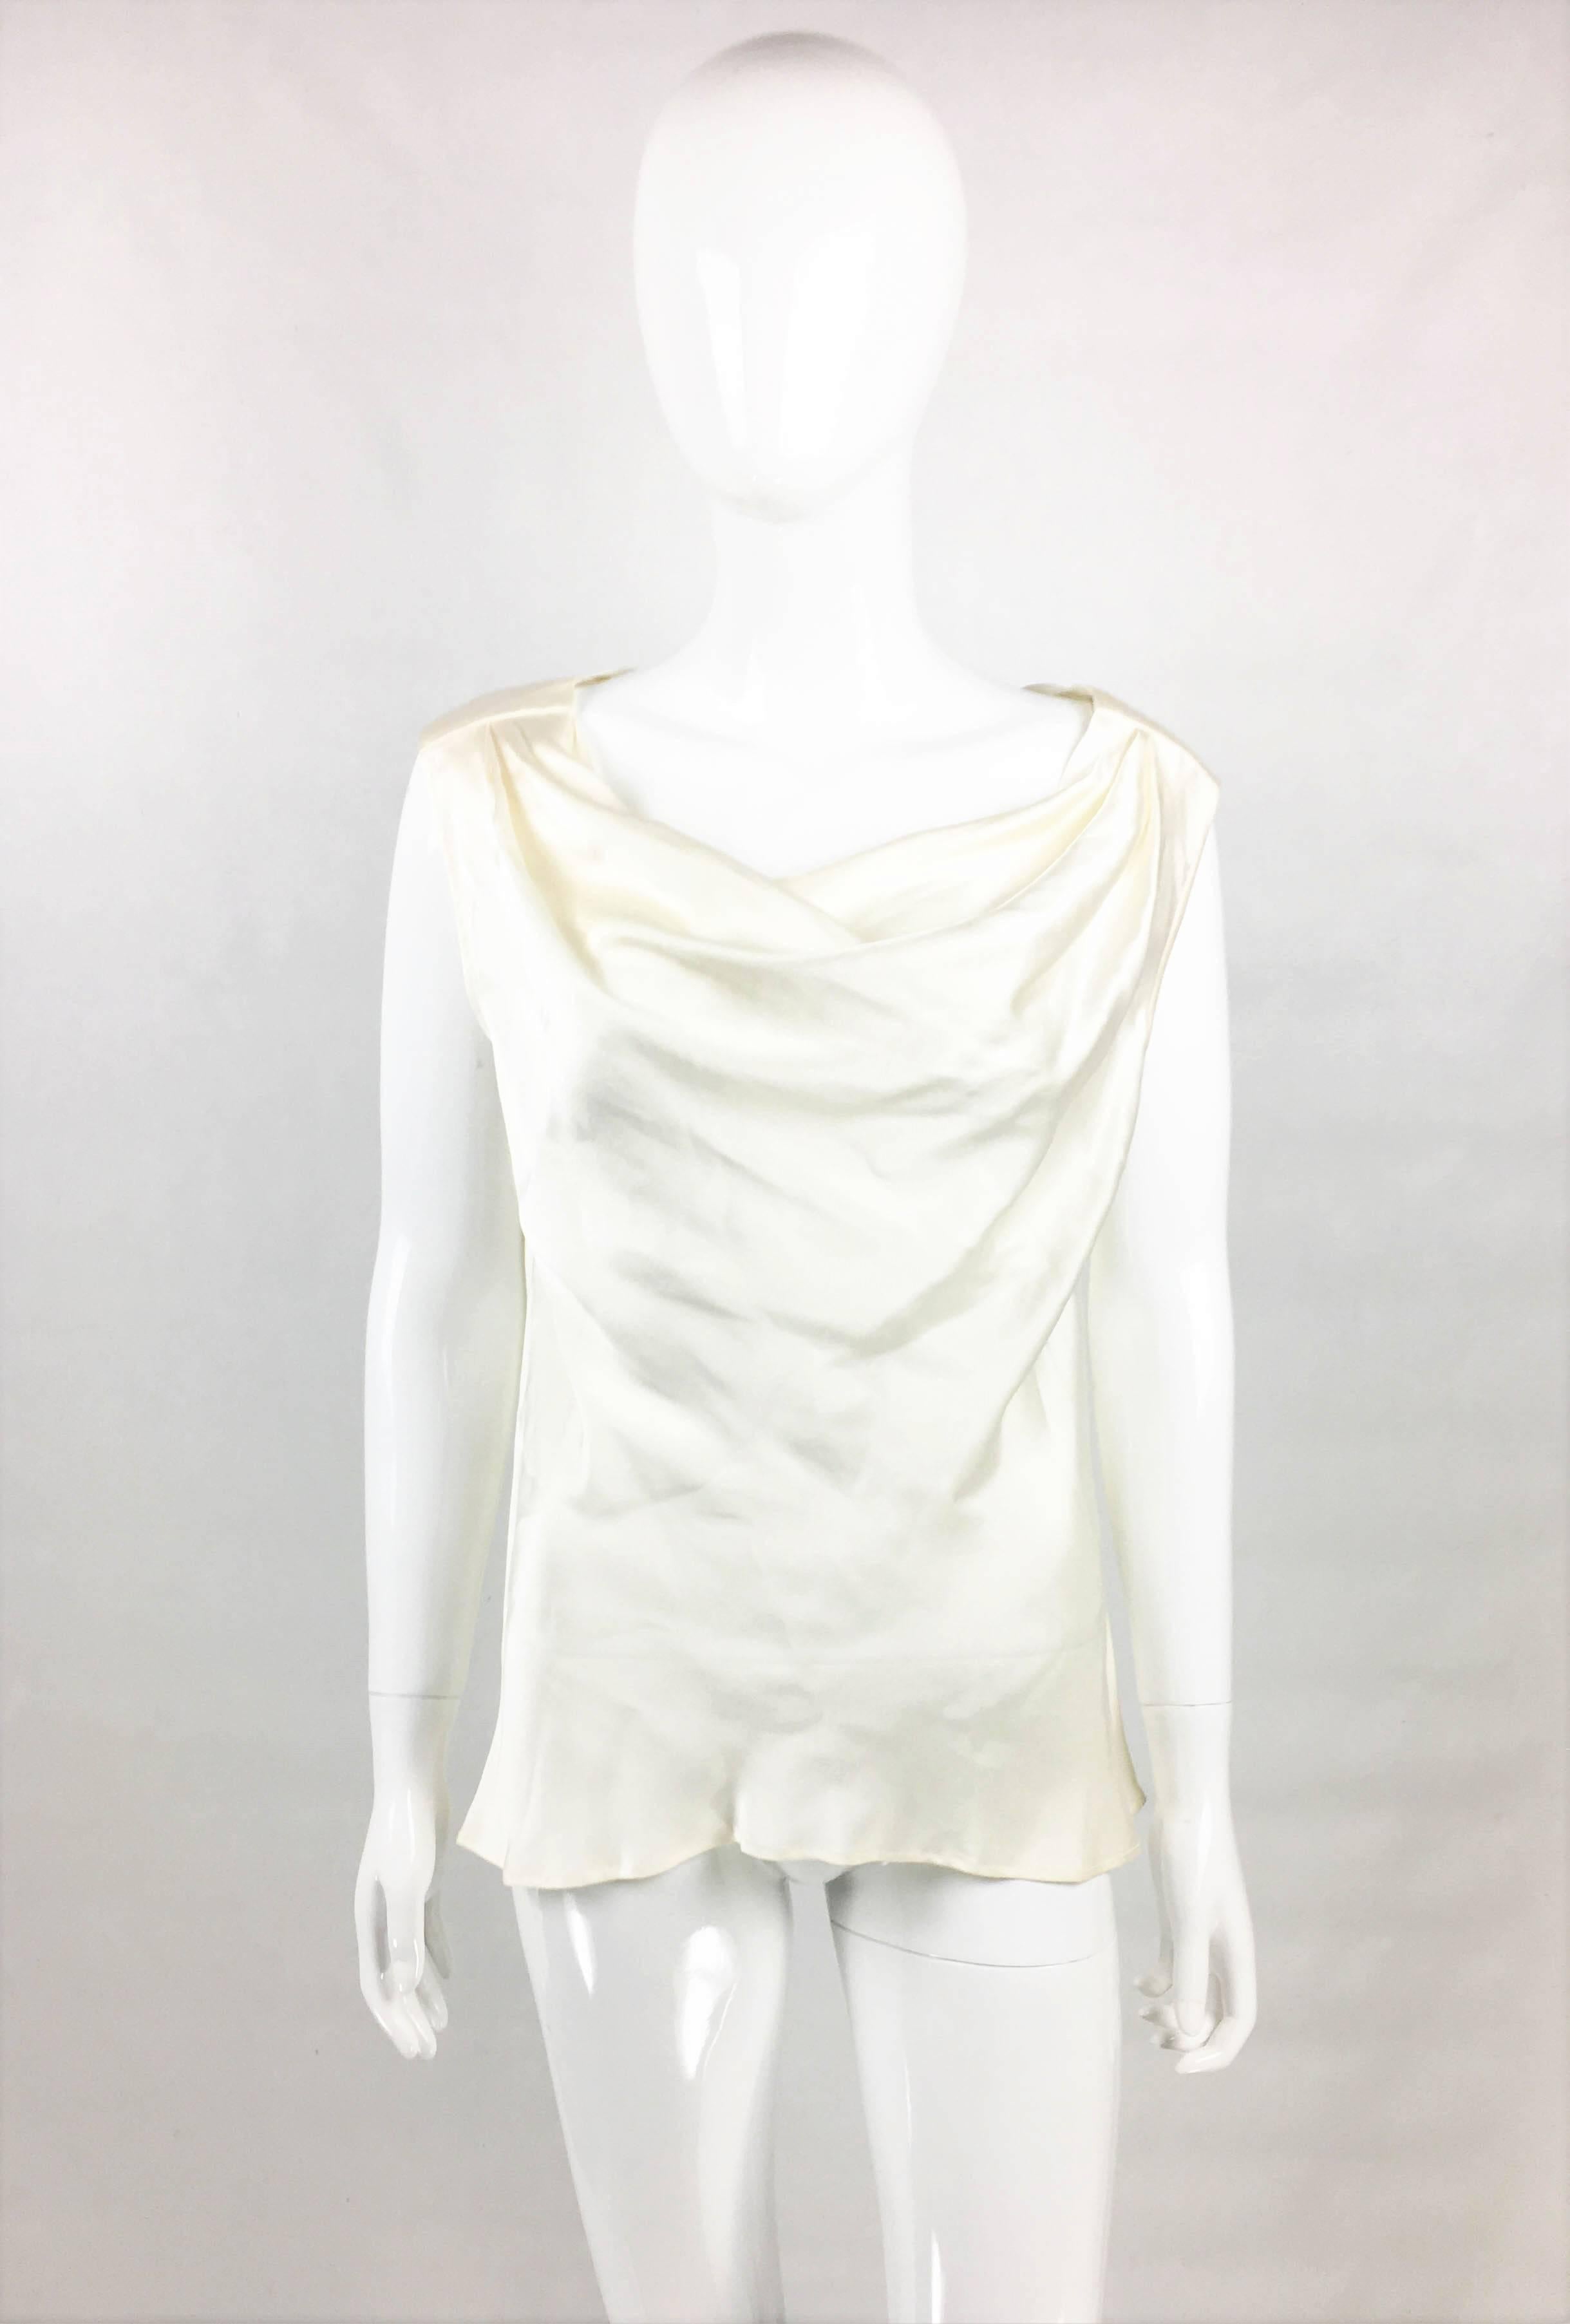 Vintage Yves Saint Laurent Rive Gauche White Silk Blouse. This pretty sleeveless blouse by Yves Saint Laurent dates back from the 1990’s. Made in white silk, it romantically drapes on the front and back. This chic and timeless piece is perfect for